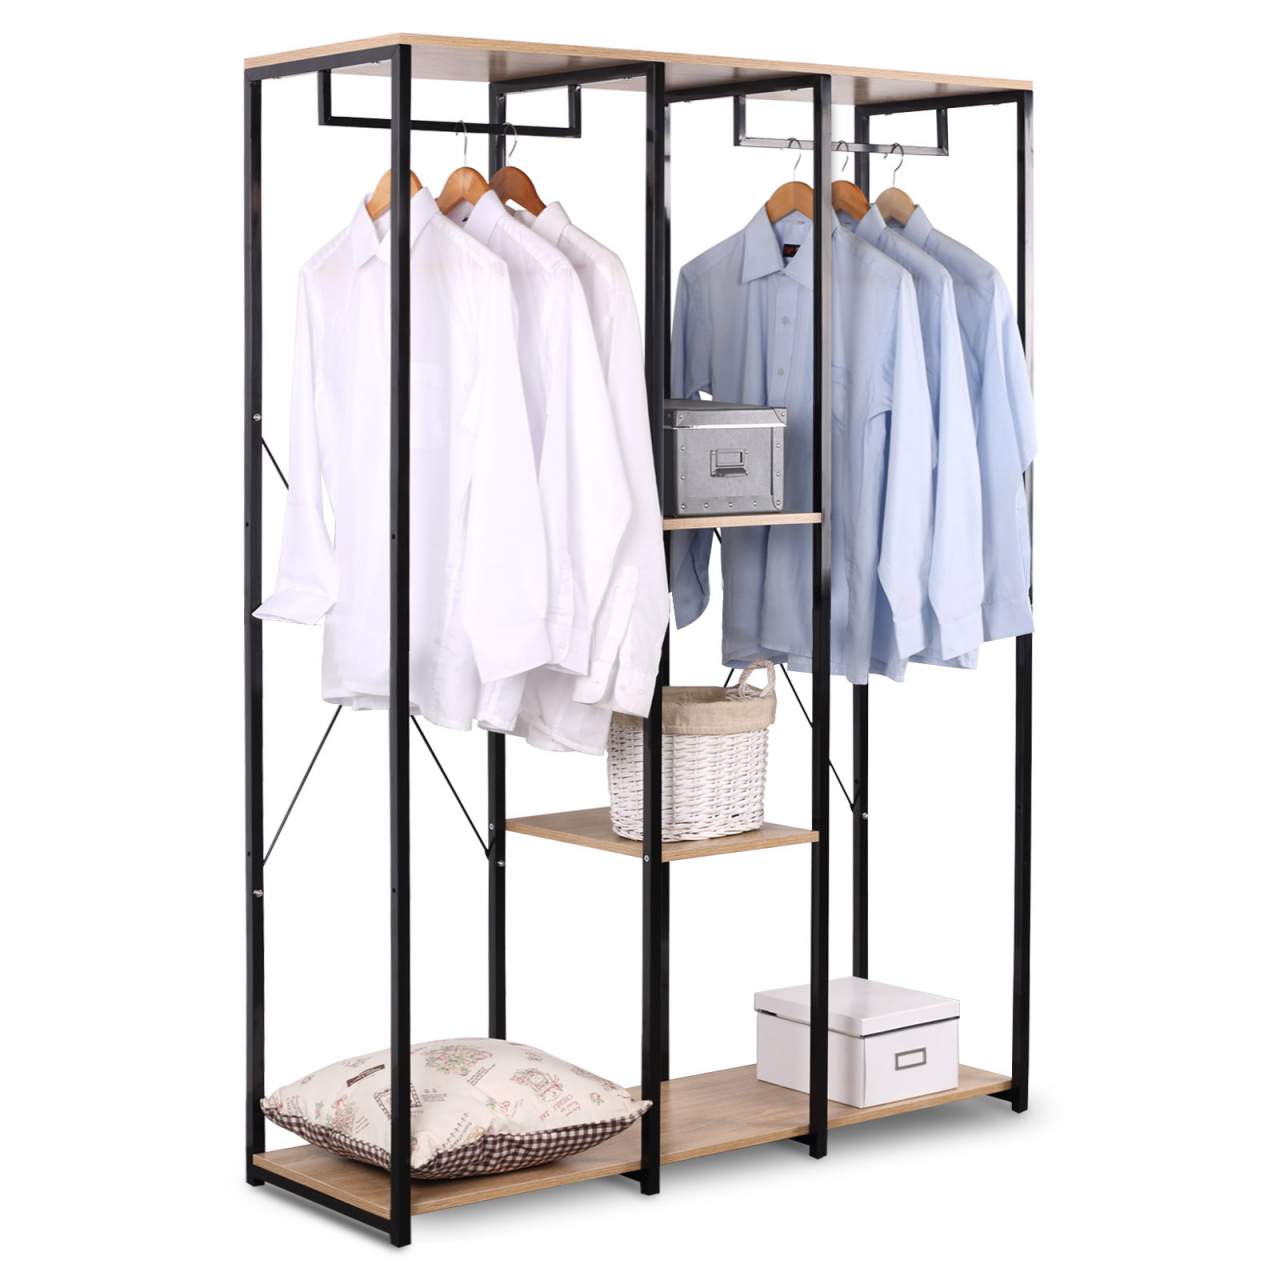 Extra Large Clothes Rail Shoe Rack, Clothes Rail With Shelves And Shoe Rack